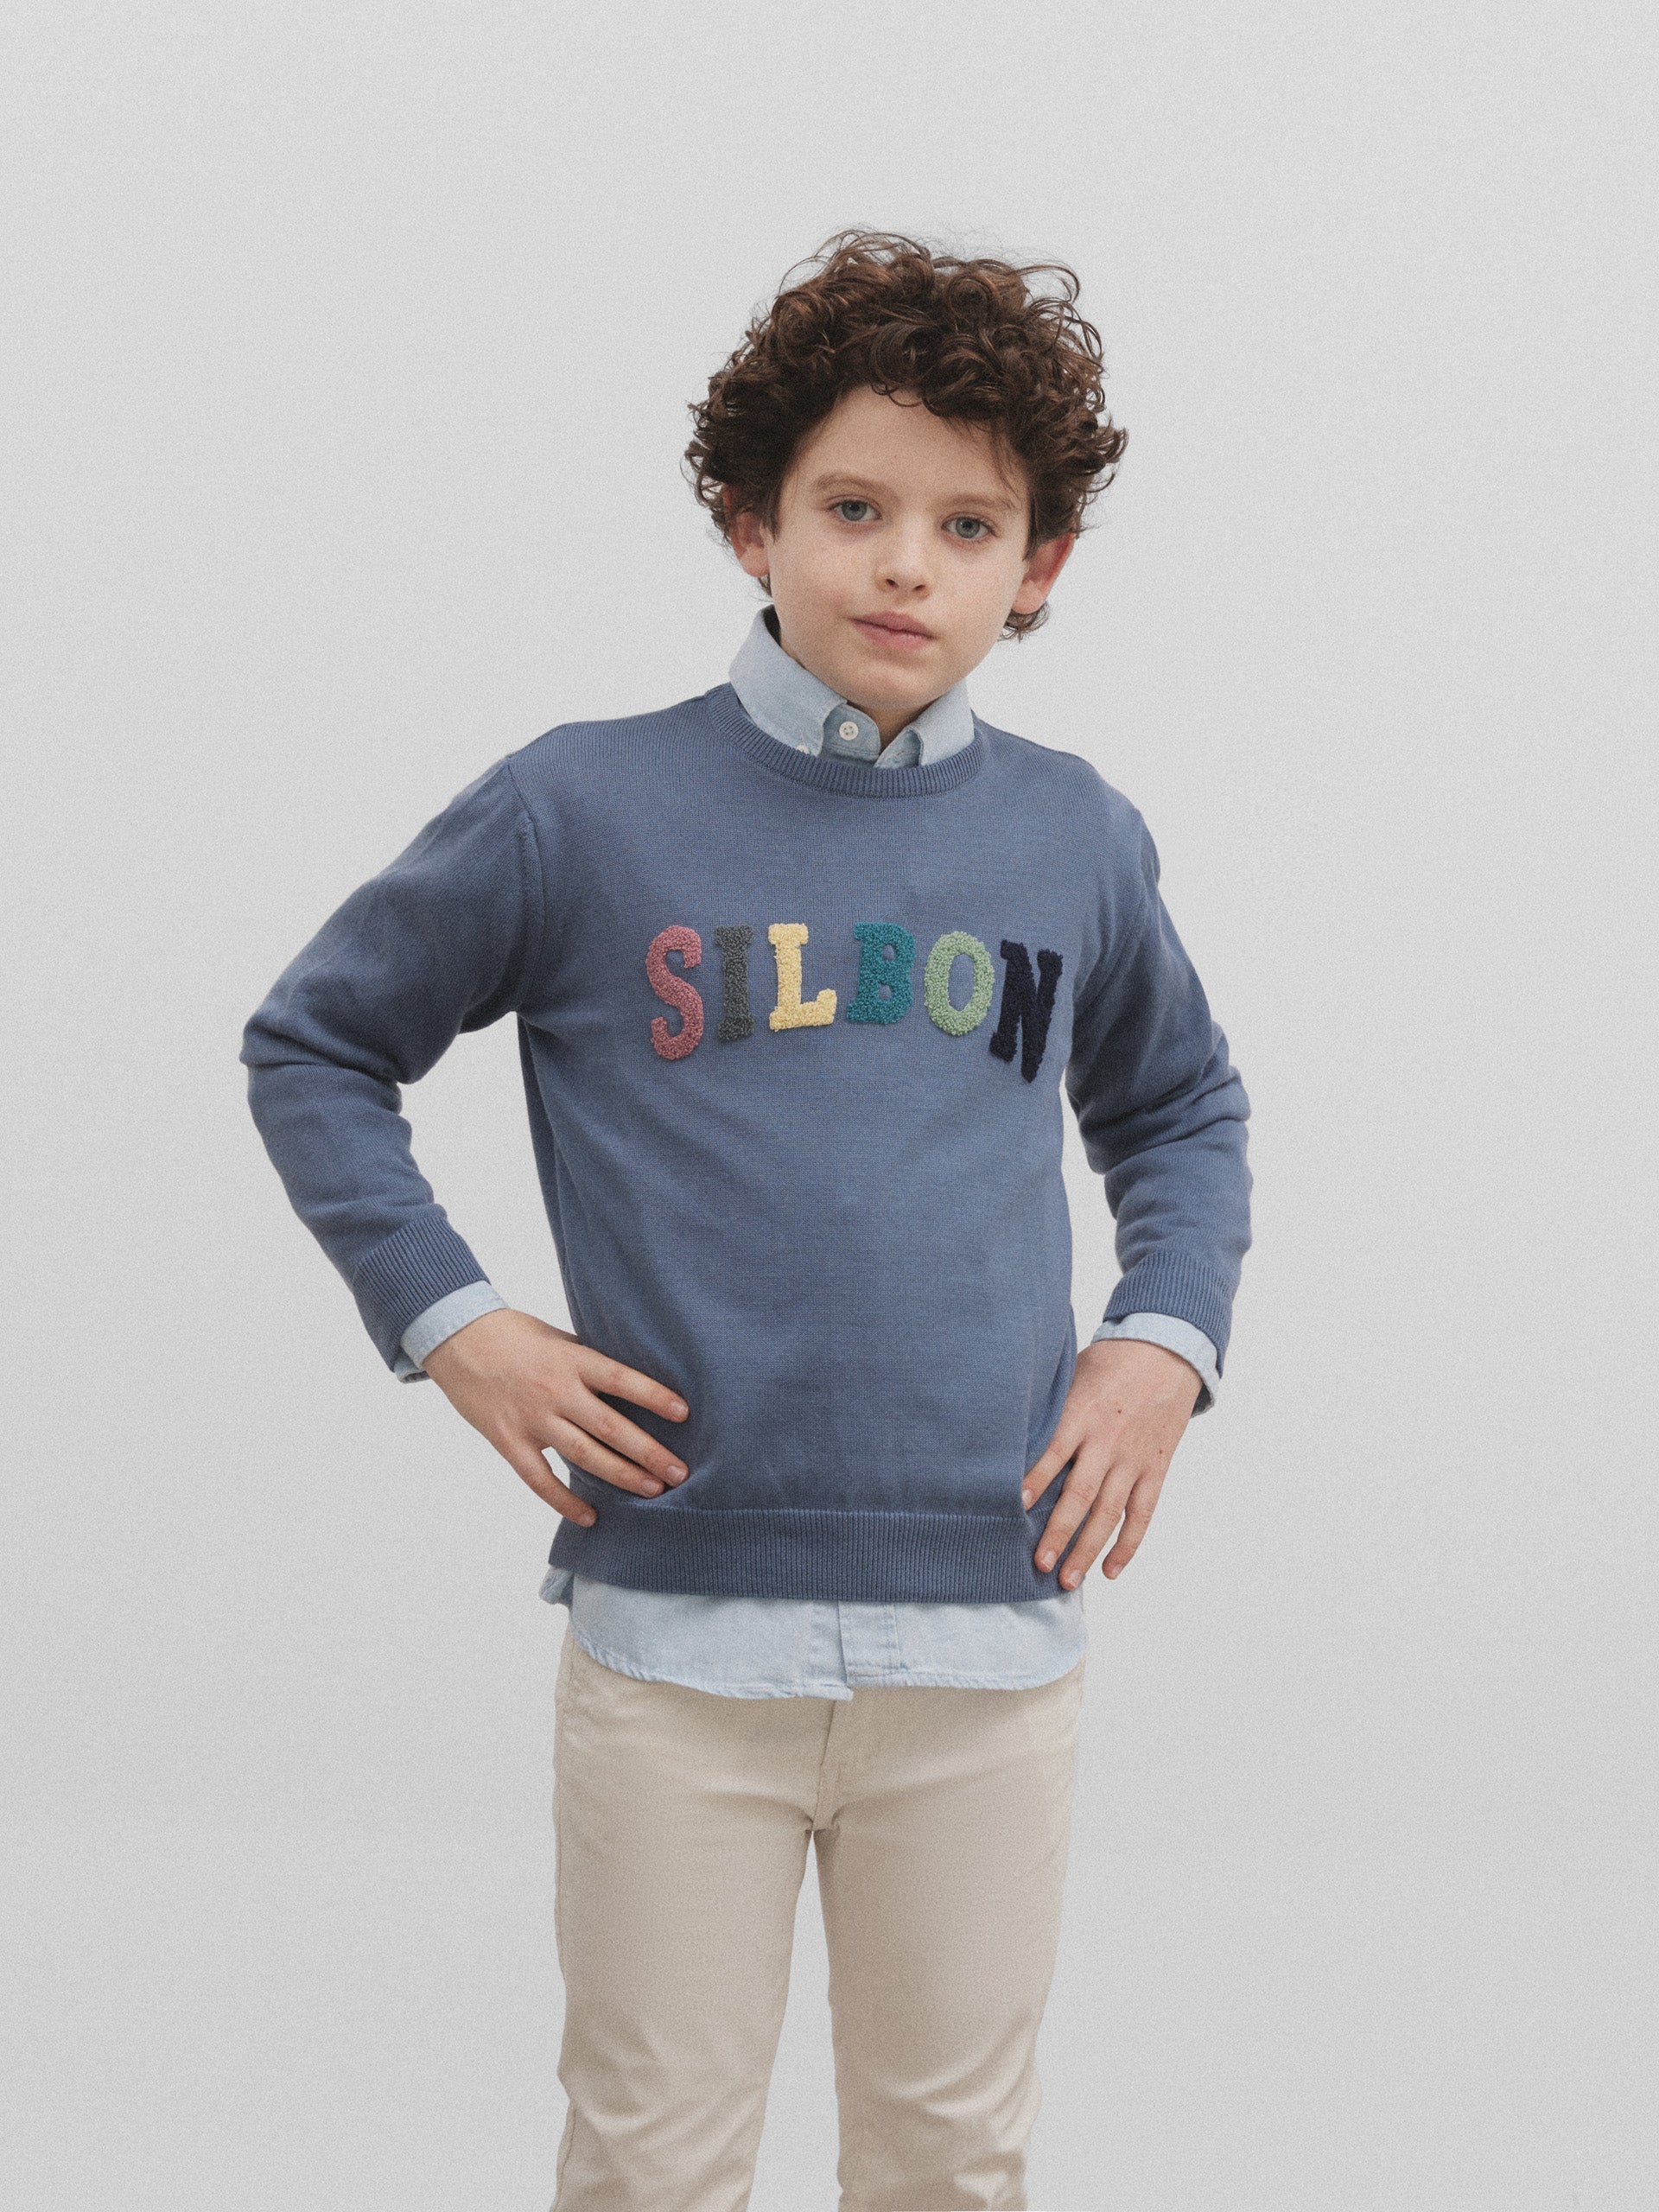 Kids sweater letters navy blue colors